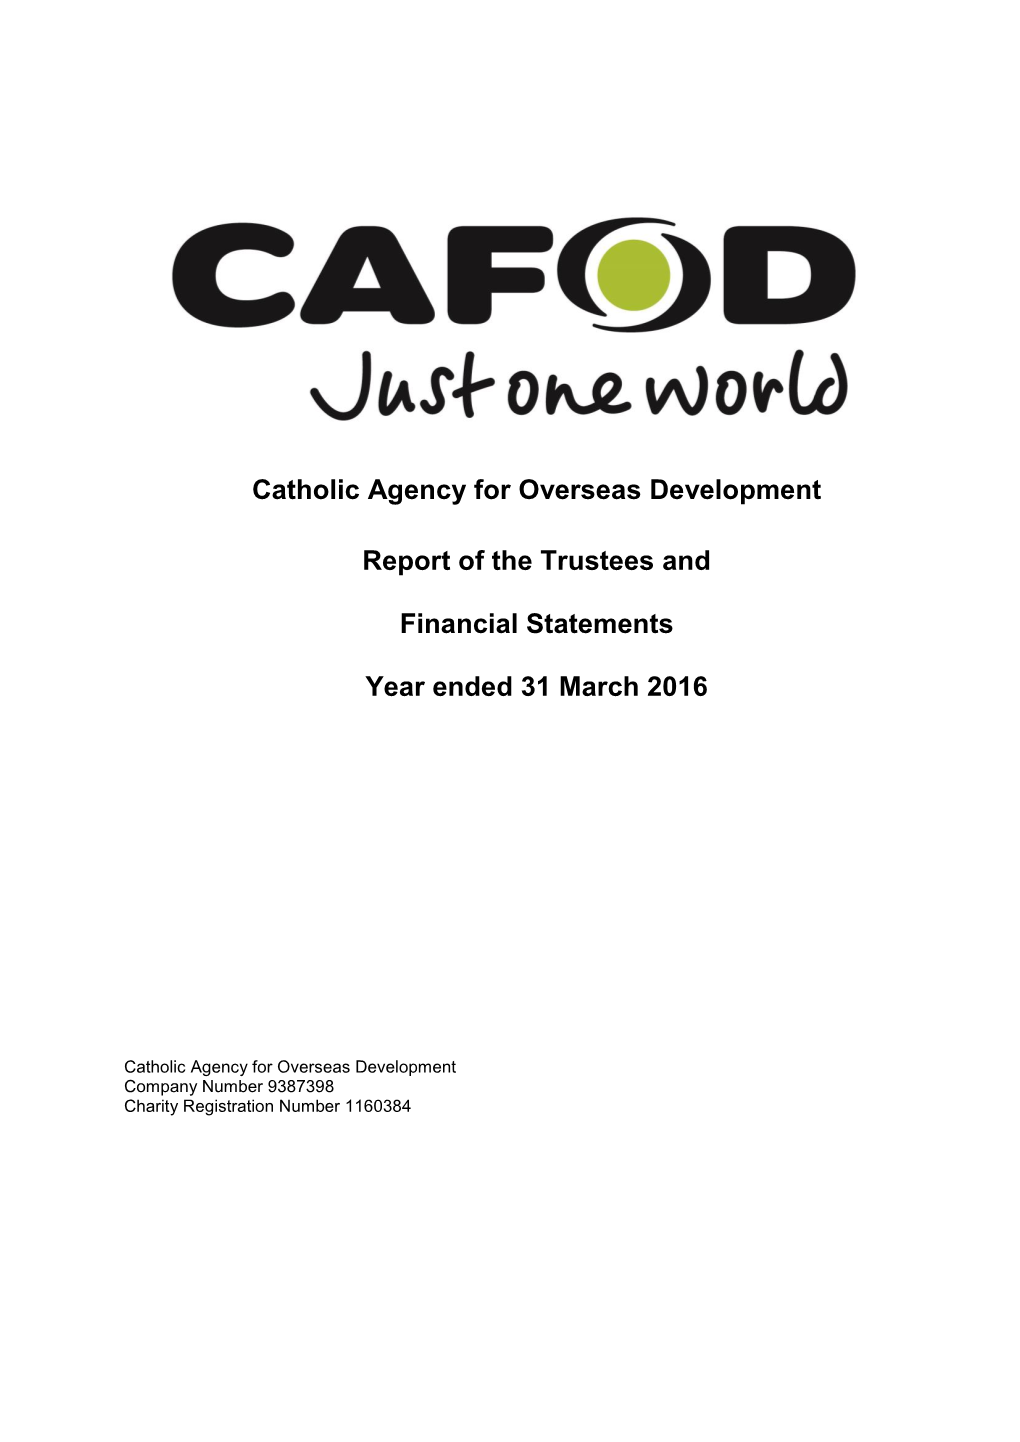 Catholic Agency for Overseas Development Report of the Trustees and Financial Statements Year Ended 31 March 2016